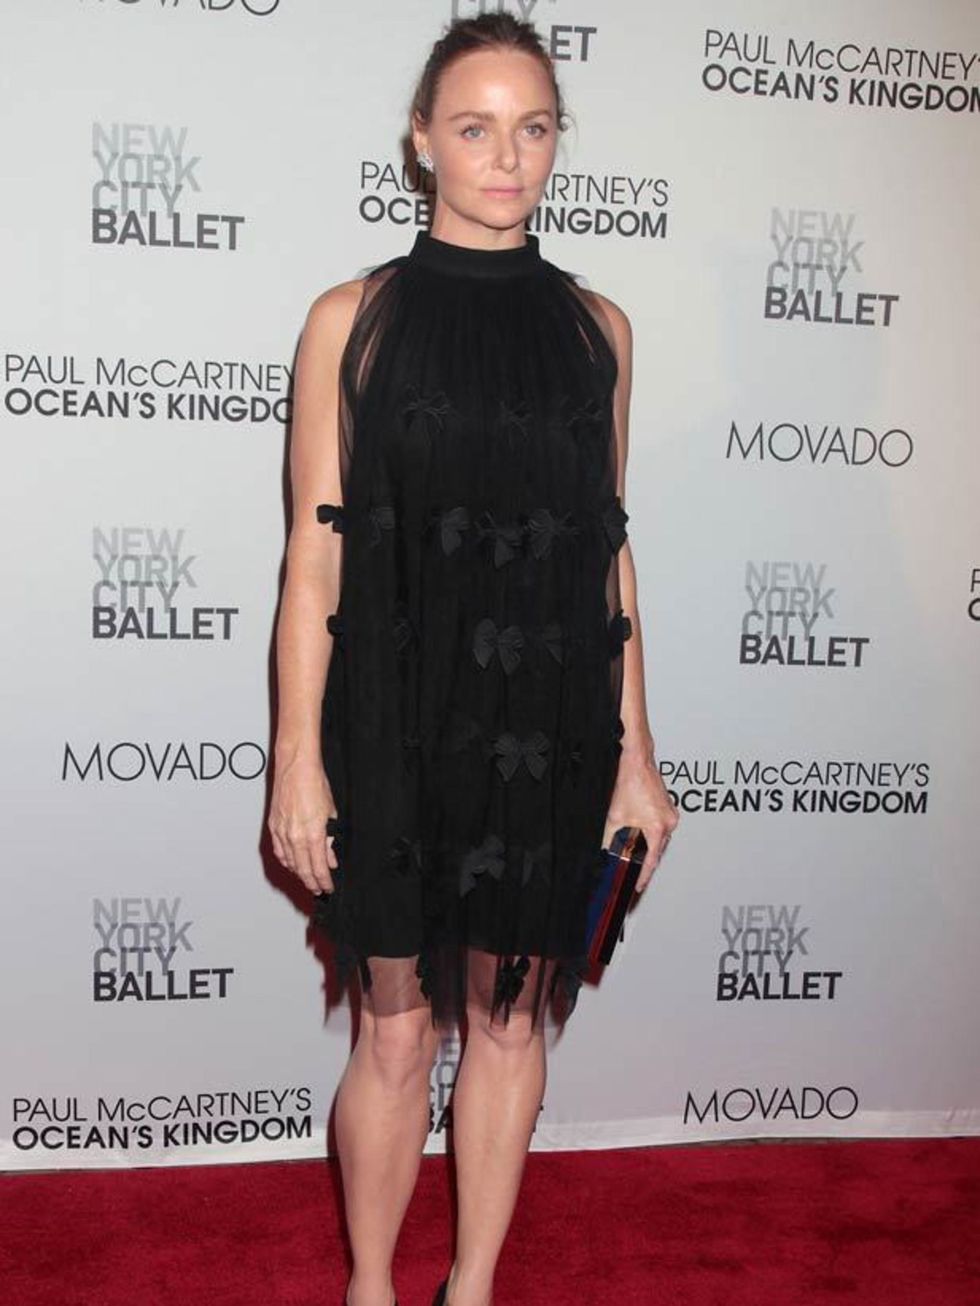 <p><a href="http://www.elleuk.com/news/star-style-news/happy-birthday-stella!/(gid)/801825">Stella McCartney</a>, who designed the costumes for father Paul's new ballet project, attended the premiere of Ocean's Kingdom at Lincoln Center last night.</p>